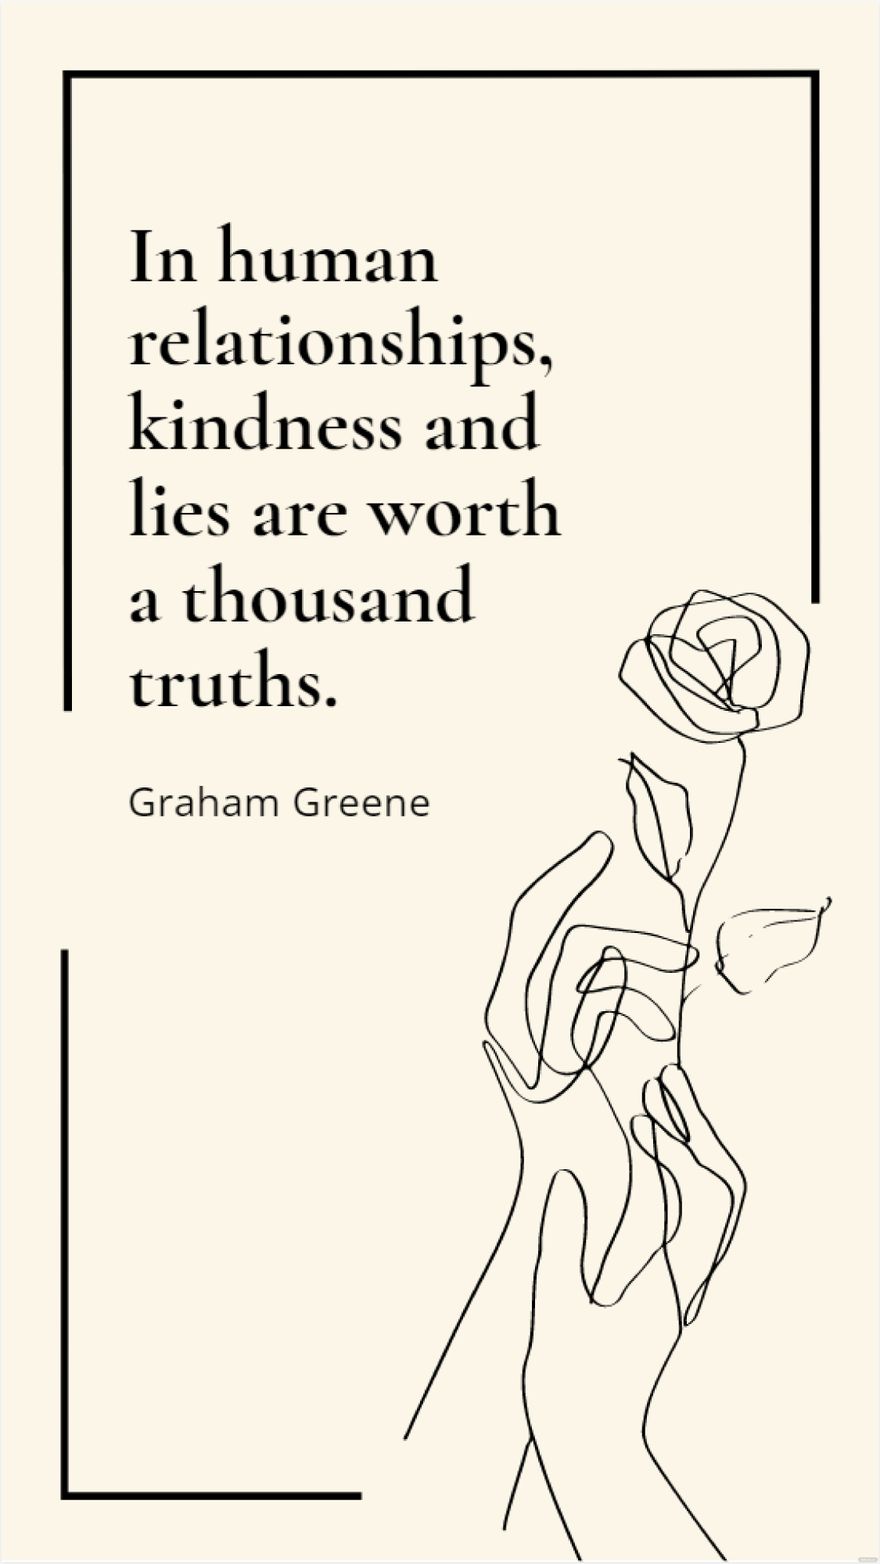 Graham Greene - In human relationships, kindness and lies are worth a thousand truths.